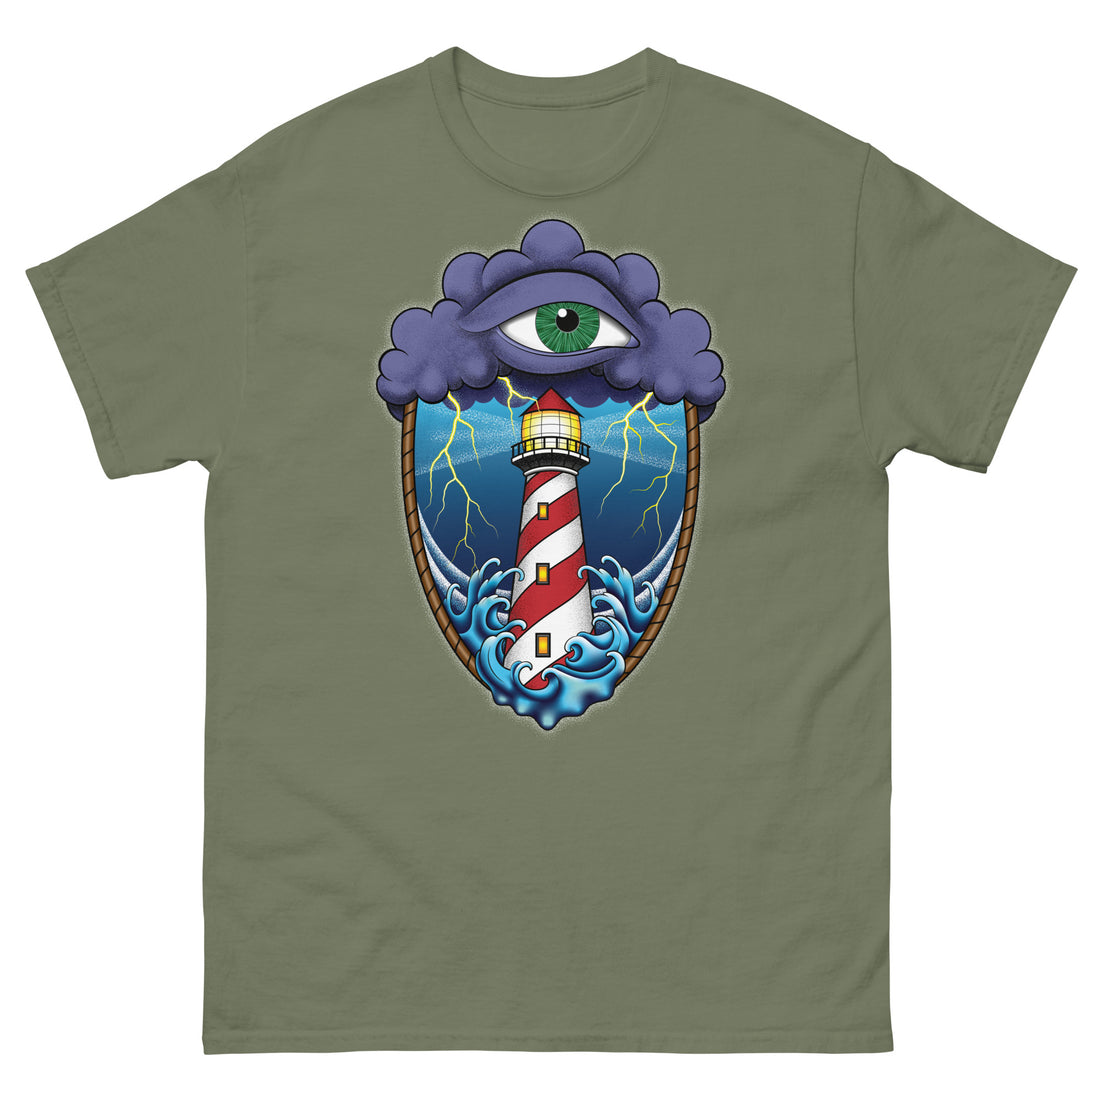 A olive green t-shirt with an old school eye of the storm tattoo design of large dark purple storm clouds at the top of the design with a green eye in the middle of the clouds.  Below the clouds is an oval shape with brown rope. Inside the rope are stormy seas and a lighthouse with lightning striking in the background.  At the bottom of the design, some of the waves are spilling out of the rope barrier. The sky and seas are hues of blue; the lighthouse is white and red striped like a barber pole.